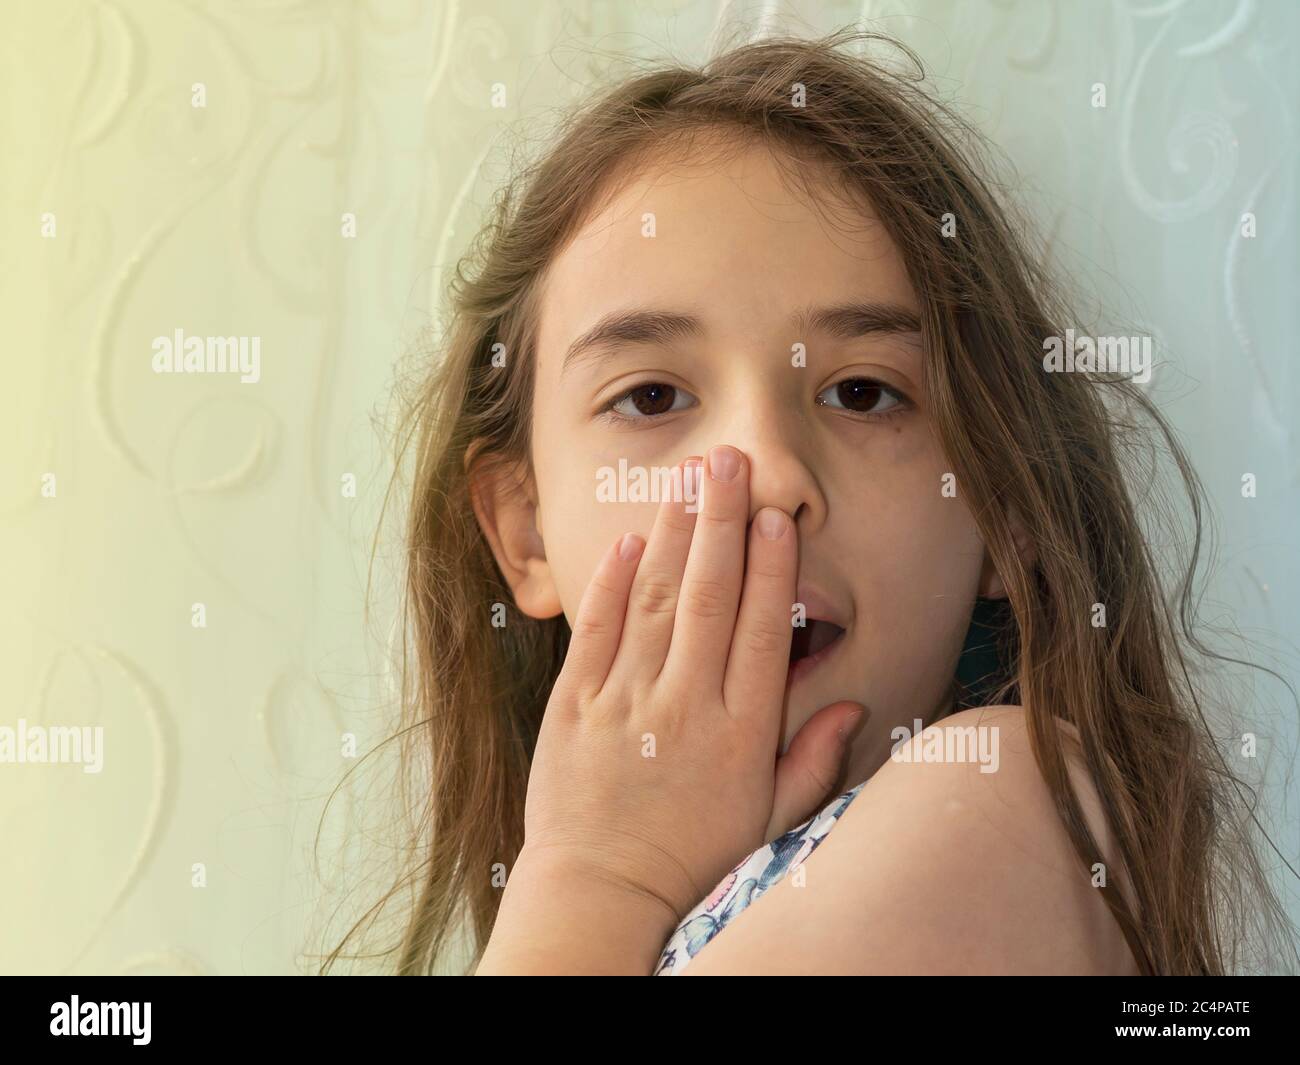 A little girl closes her own mouth. Astonished and surprised long hair girl close her own mouth with her own hand front the yellow and blue background Stock Photo